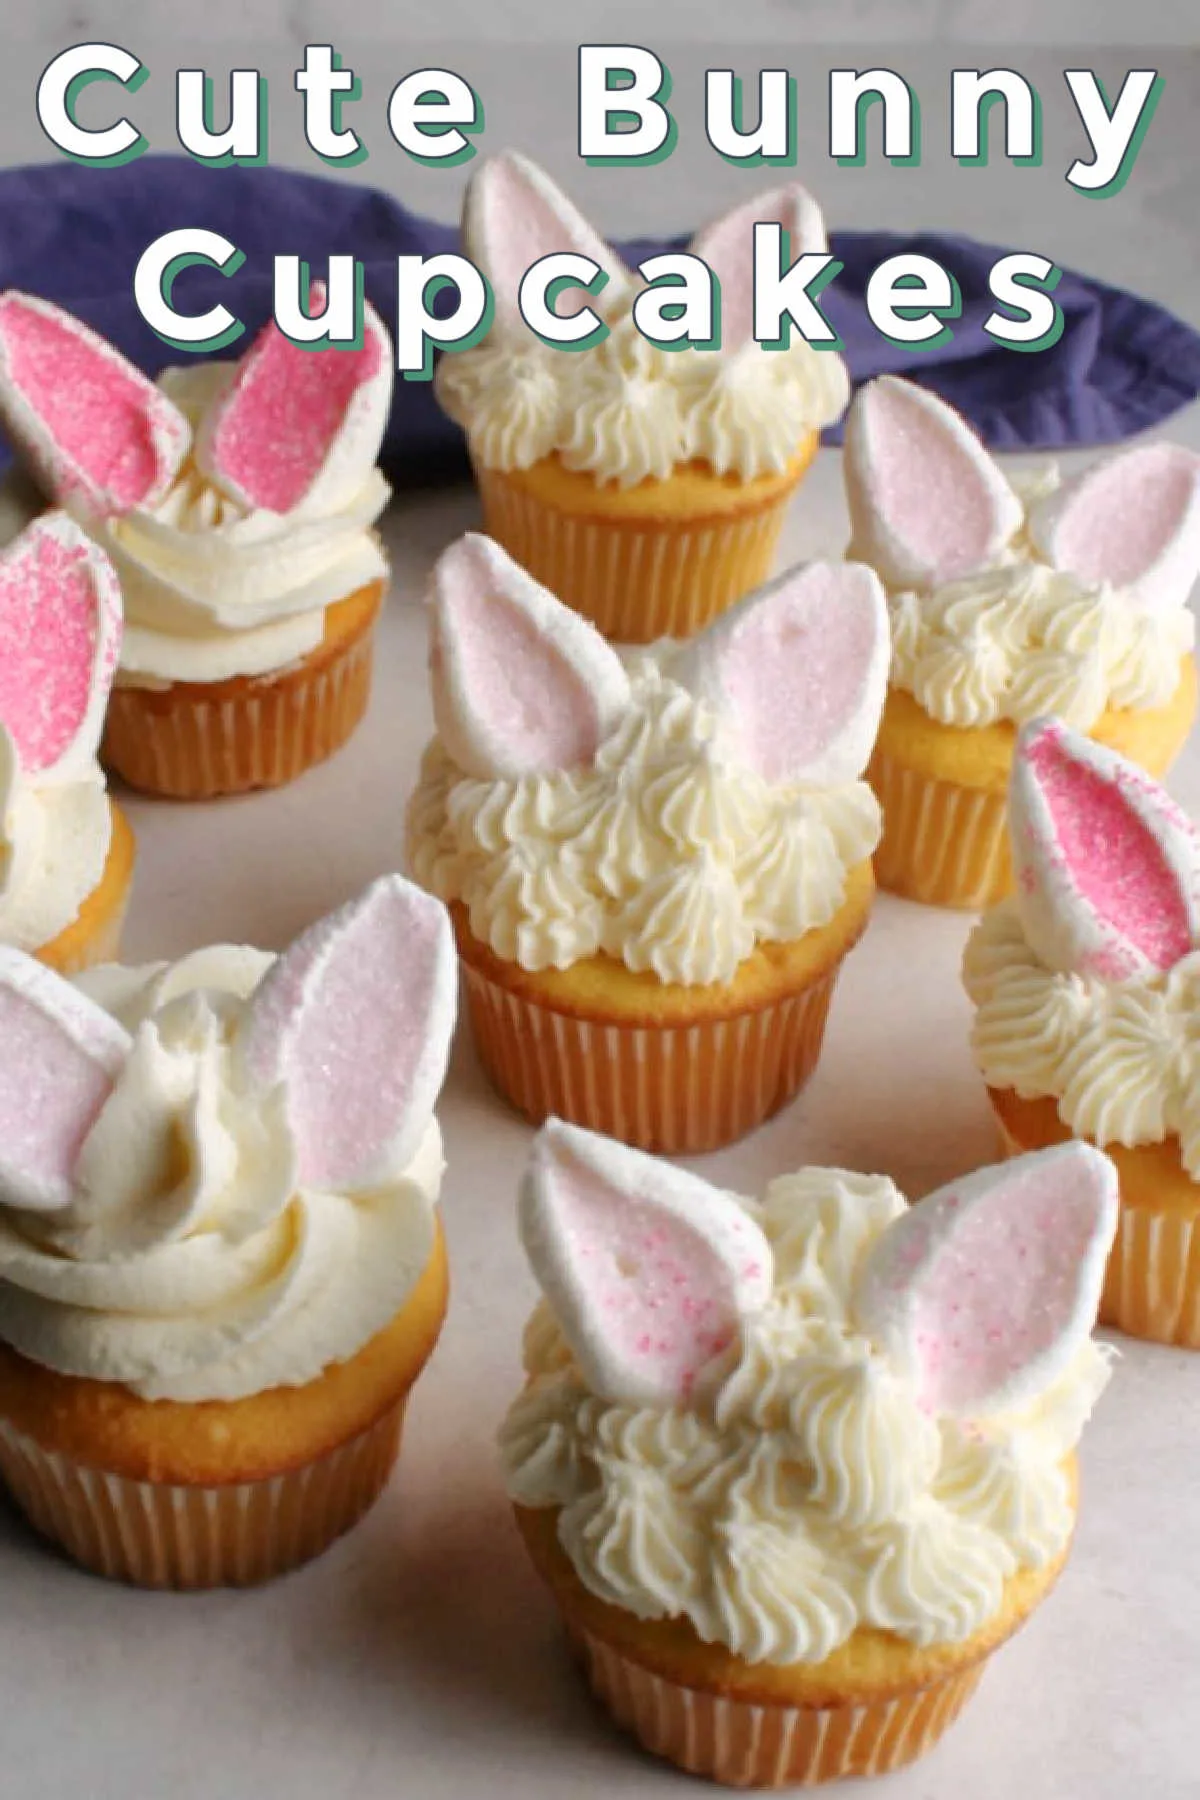 If you are looking for a cute and fun way to decorate cupcakes, you have come to the right place. These bunnies are so simple to make too, so you don’t have to worry if you don’t have expert level decorating skills. They are perfect for Easter, baby showers or even birthday parties so whip some up the next chance you get!